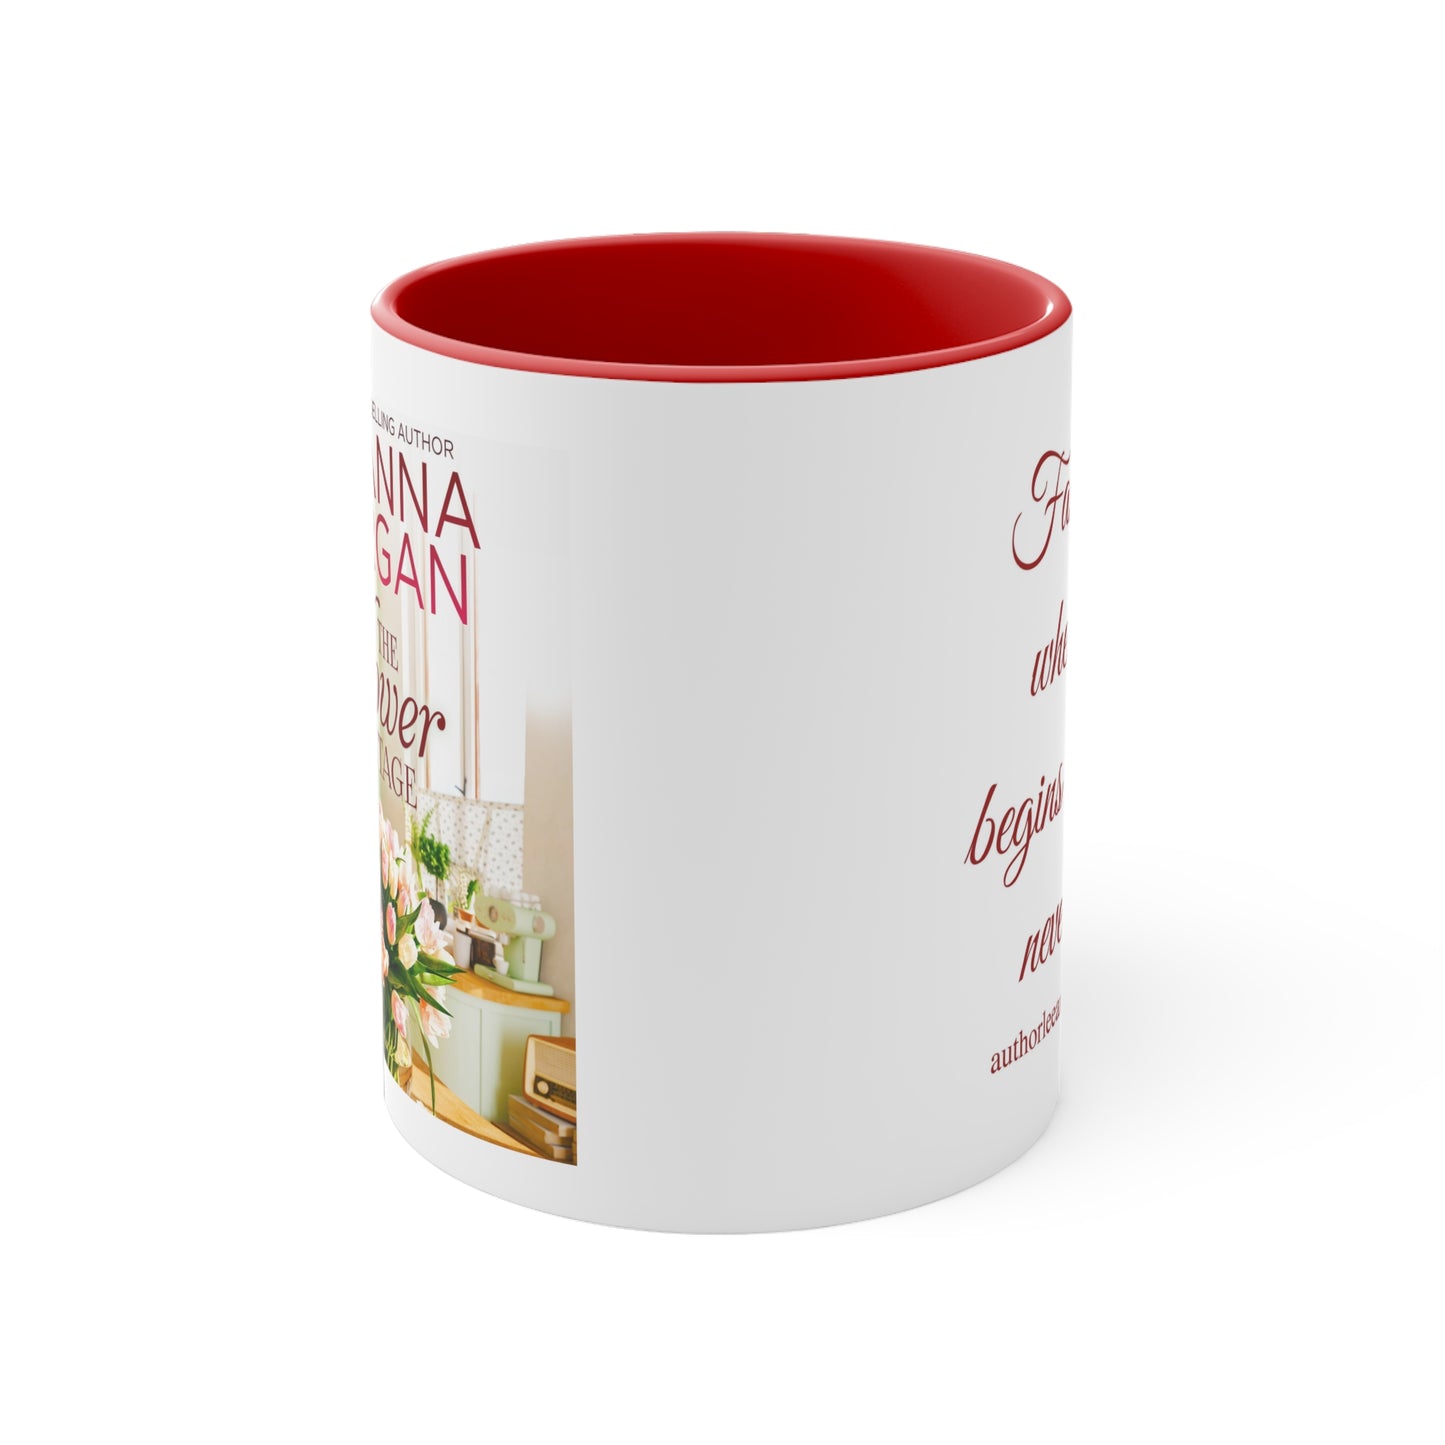 The Flower Cottage Coffee Mug - Family is where life begins and love never ends